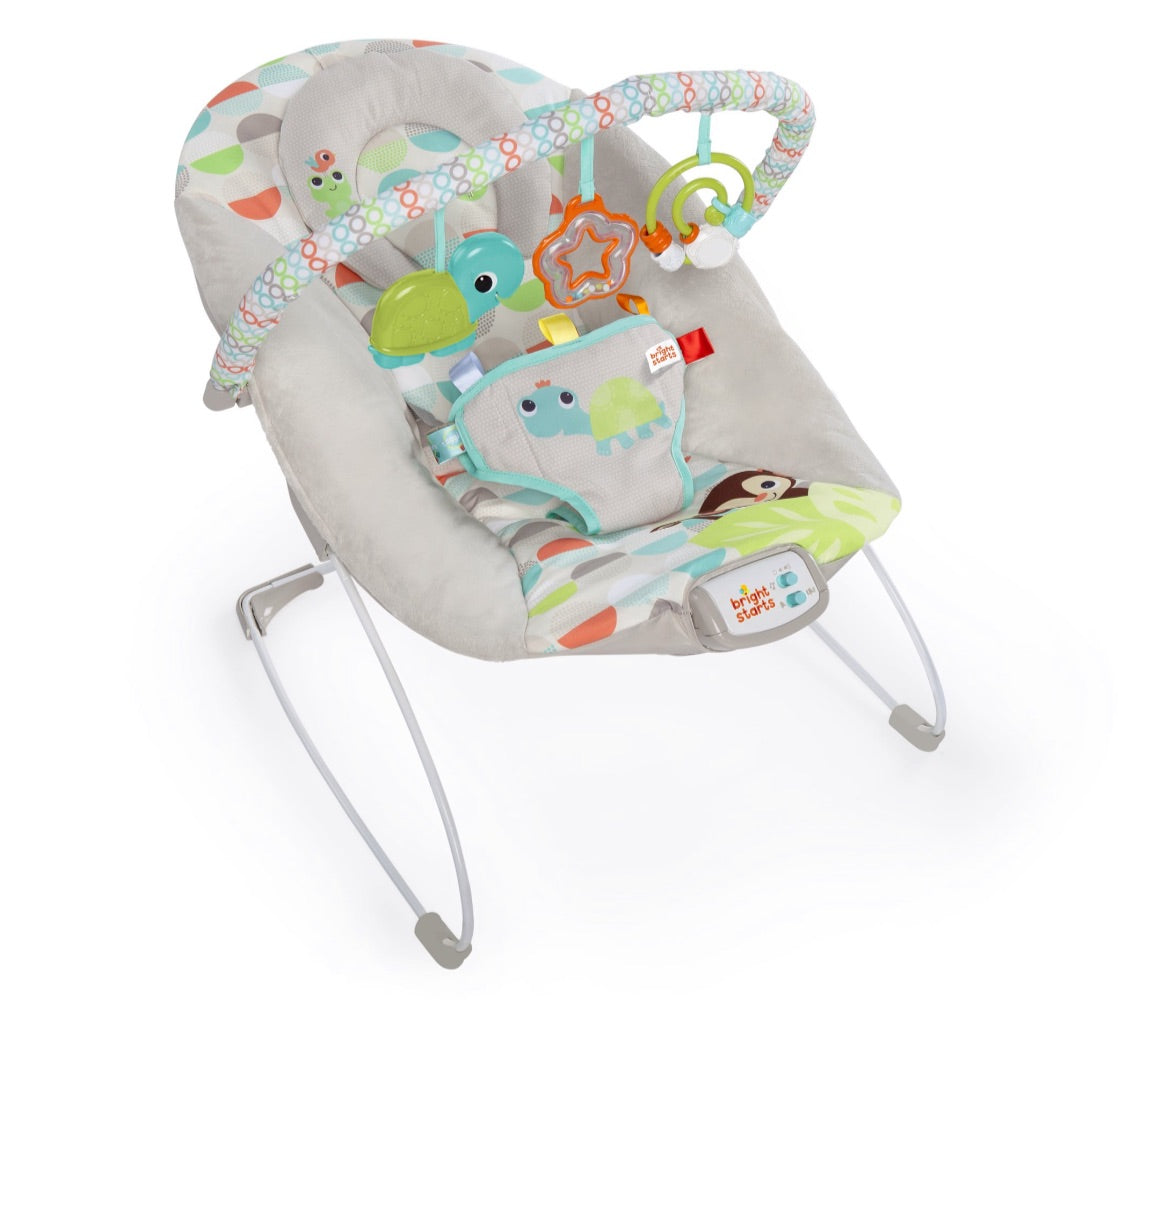 krølle ovn Udvidelse Bright Starts Baby Bouncer Soothing Vibrations Infant Seat - Taggies, –  XioBuy